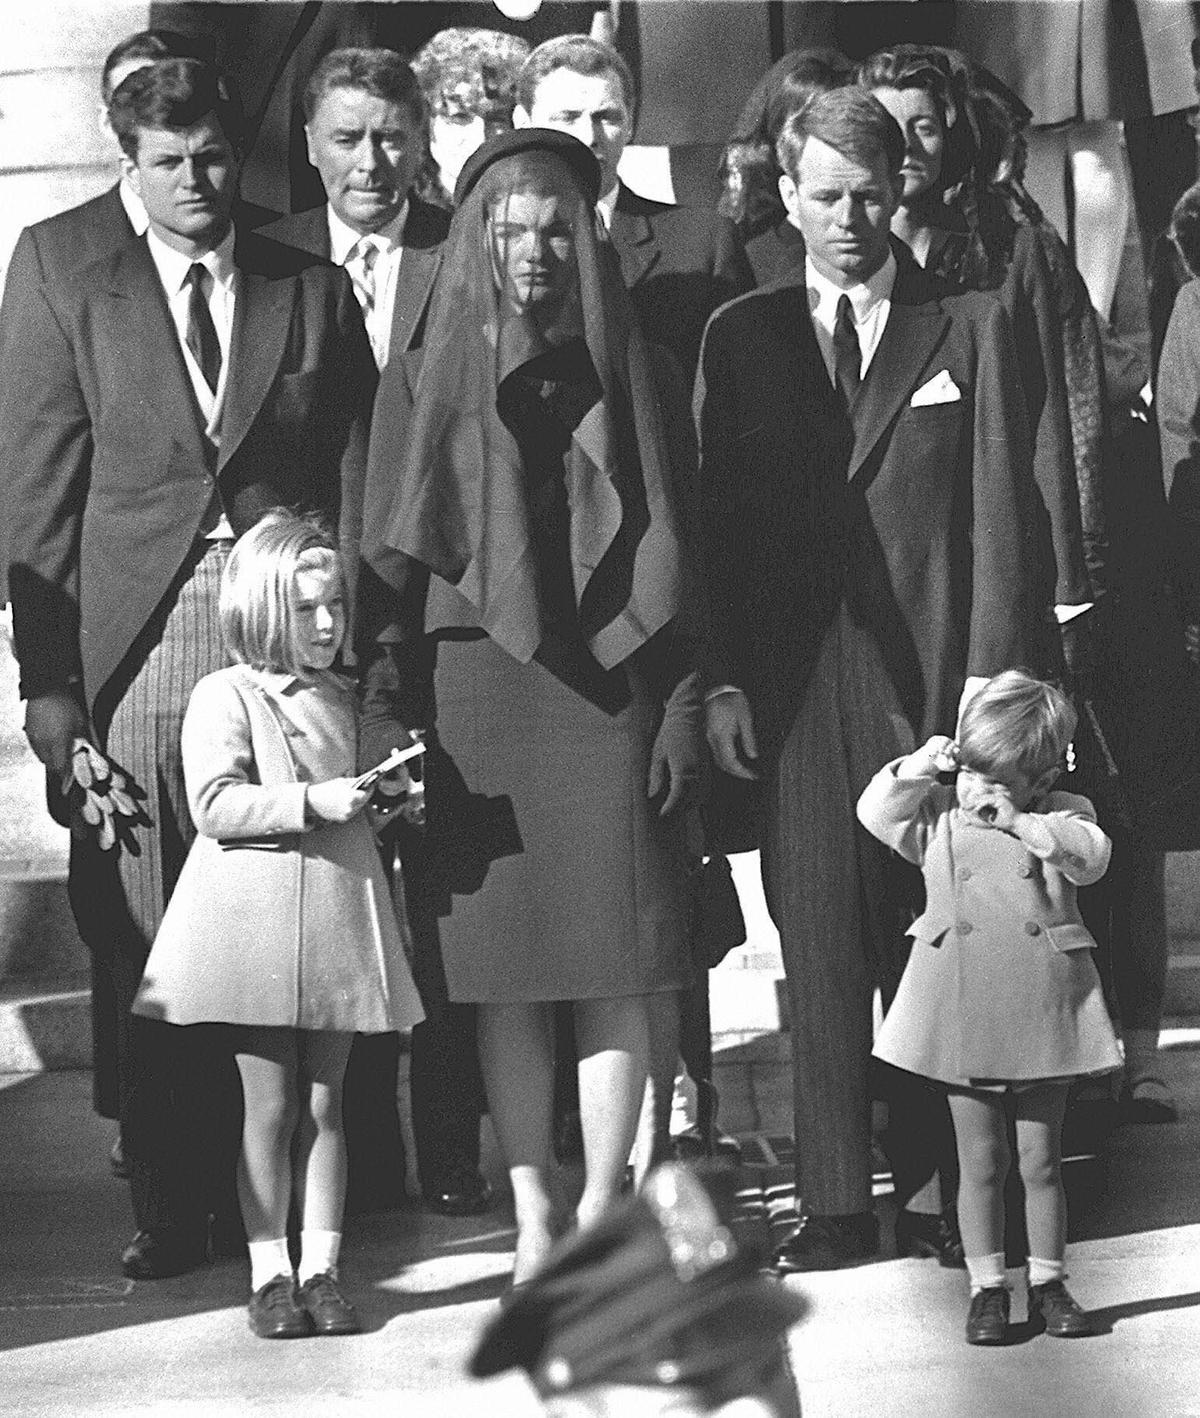 Jacqueline Kennedy (C) stands with her two children Caroline Kennedy (L) and John F. Kennedy, Jr.(R) and brothers-in-law Ted Kennedy (L, back) and Robert Kennedy (2ndR) at the funeral of her husband US President John F. Kennedy in Washington, DC on Nov. 25, 1963. (AFP/Getty Images)